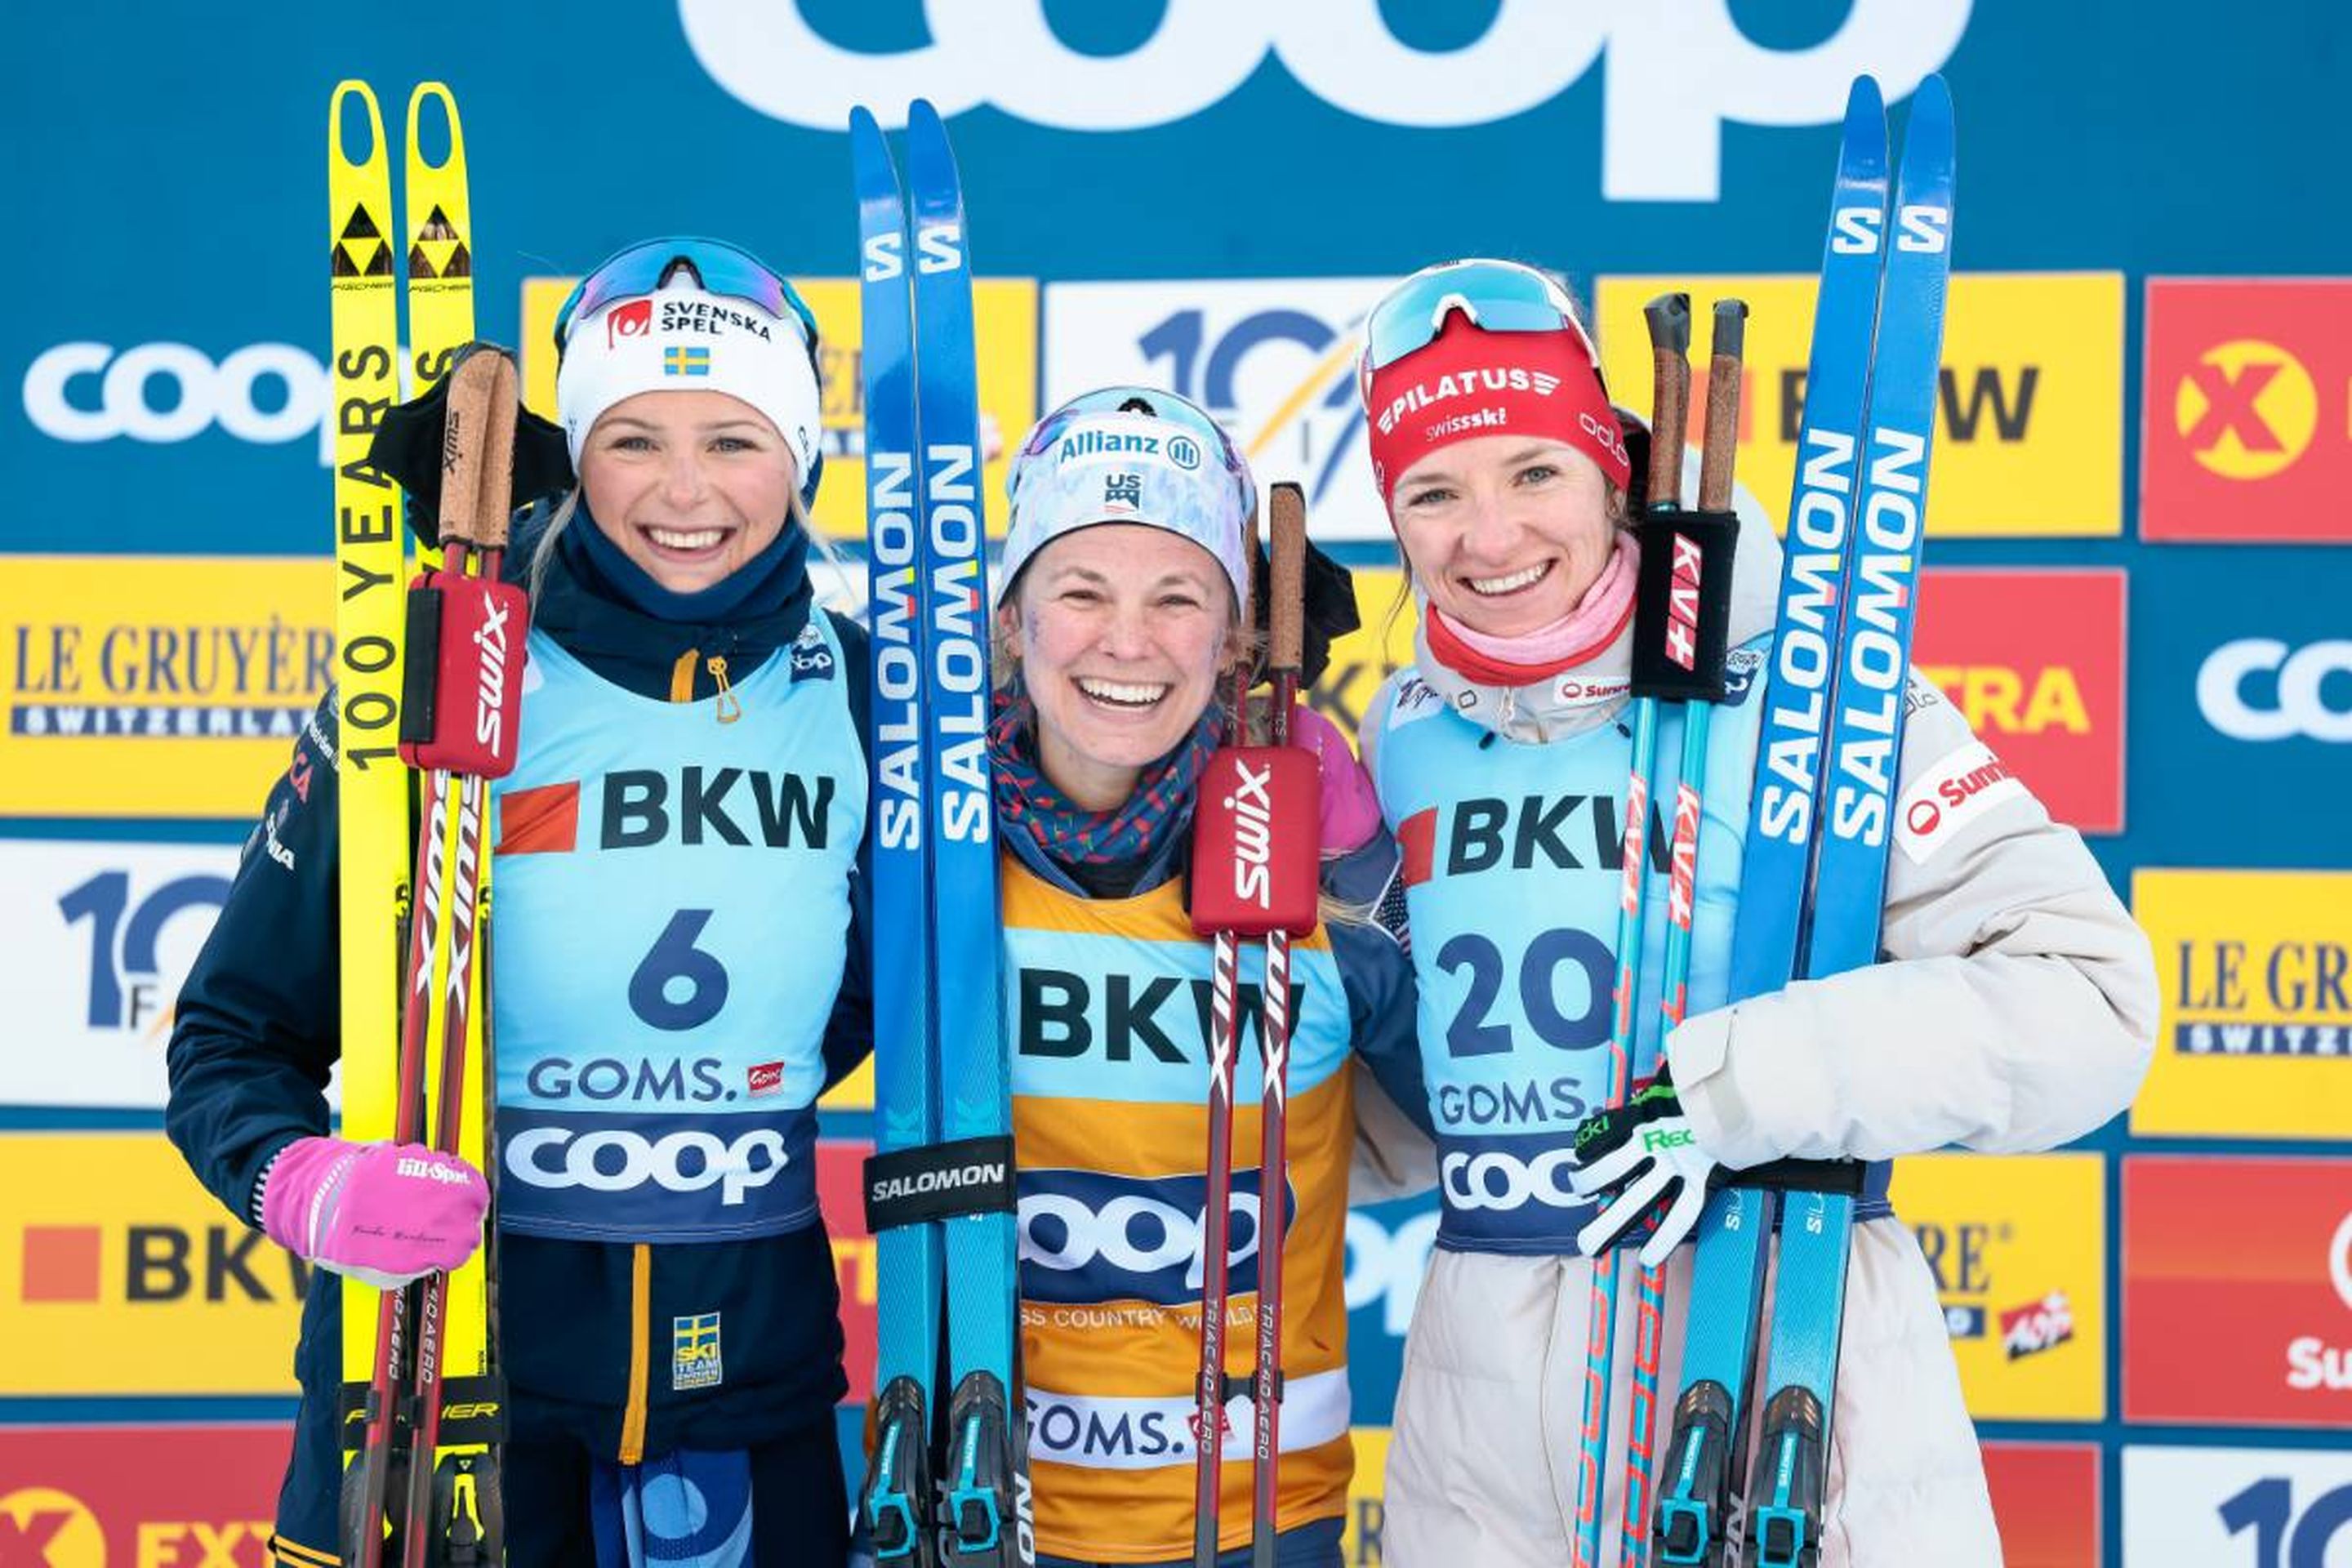 All smiles on the podium: Sweden's Frida Karlsson (left), USA's Jessie Diggins (centre) and Switzerland's Nadine Faehndrich (right) claimed the three top spots © NordicFocus